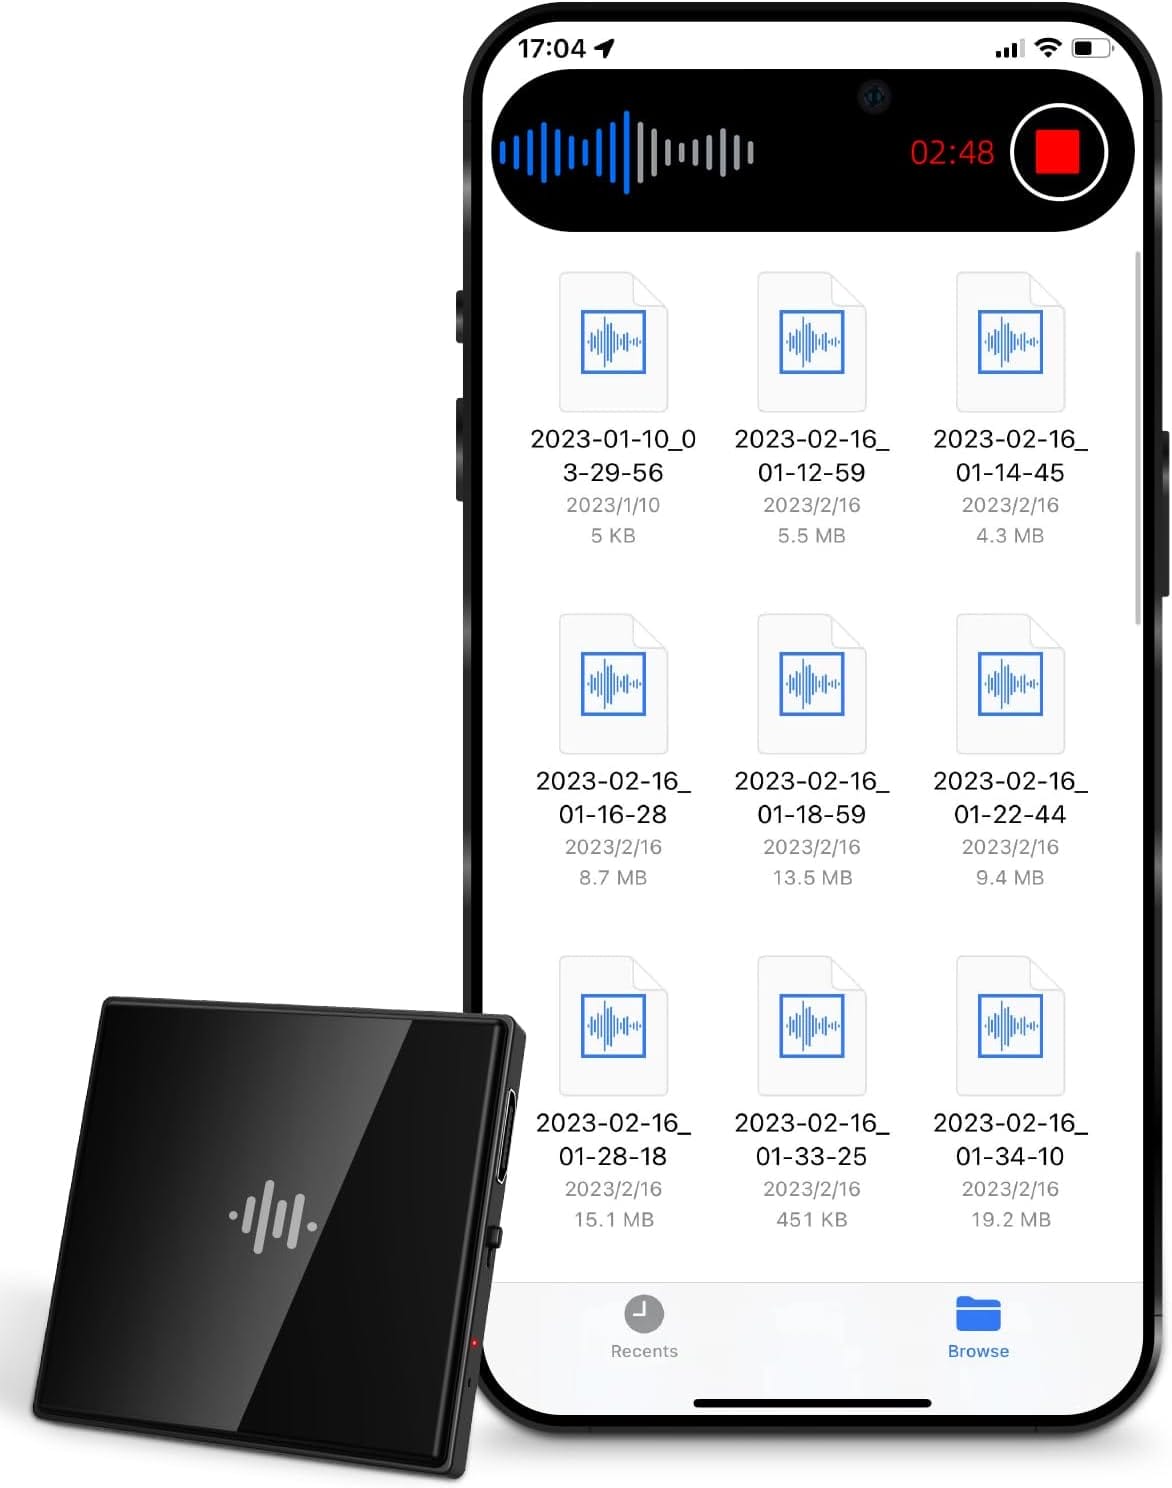 Voice Recorder, Audio recorder with AI-Triple Intelligent Noise Cancellation,Recording Device with 64GB,Digital Video Recorders with Playback, Voice Activated Recorder for Lectures, Meetings, Intervie